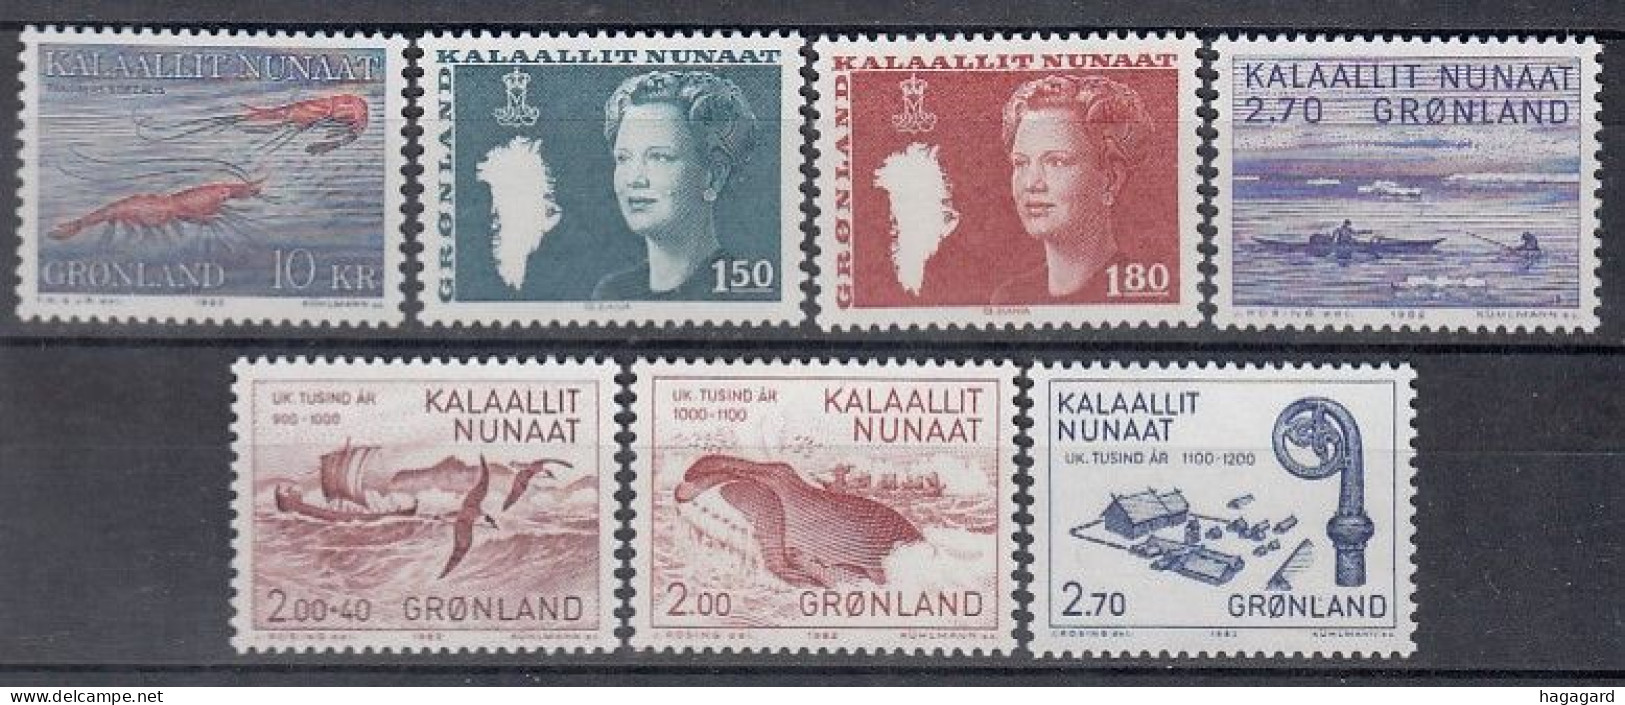 B1717. Greenland 1982. Complete Year Set. Michel 133-39. (7.60€). MNH(**) - Full Years